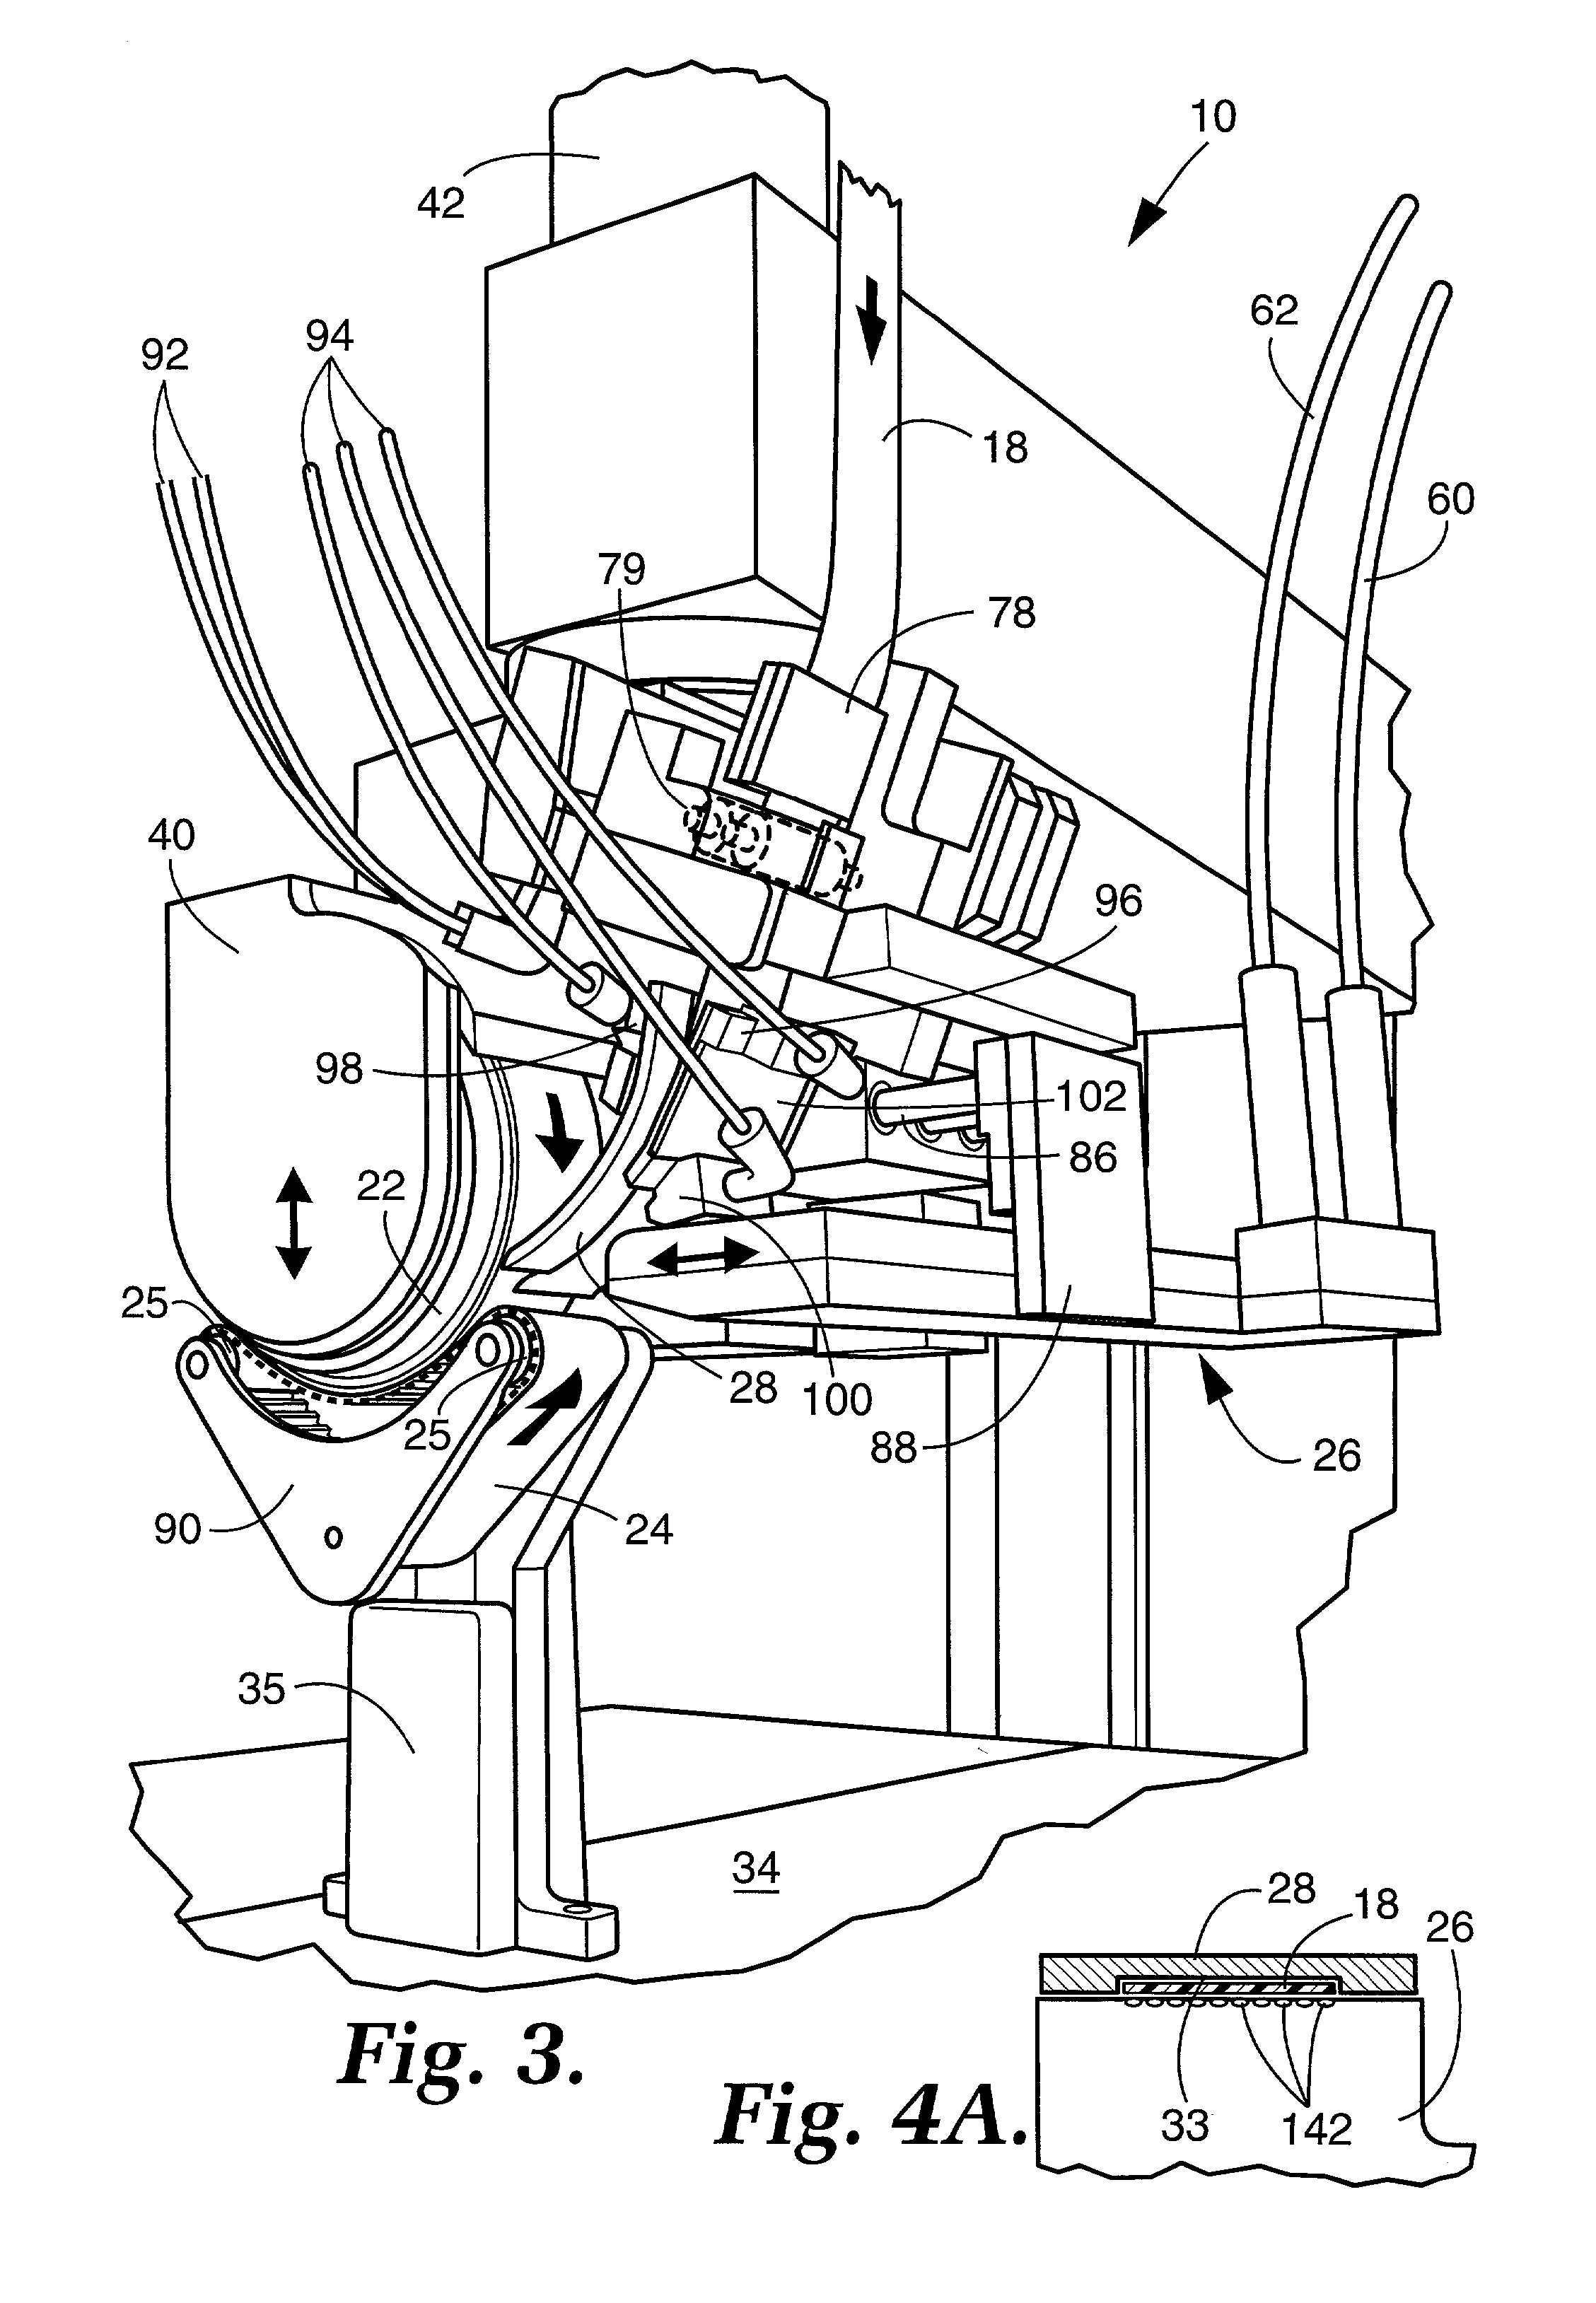 Seam sealing apparatus and process therefor